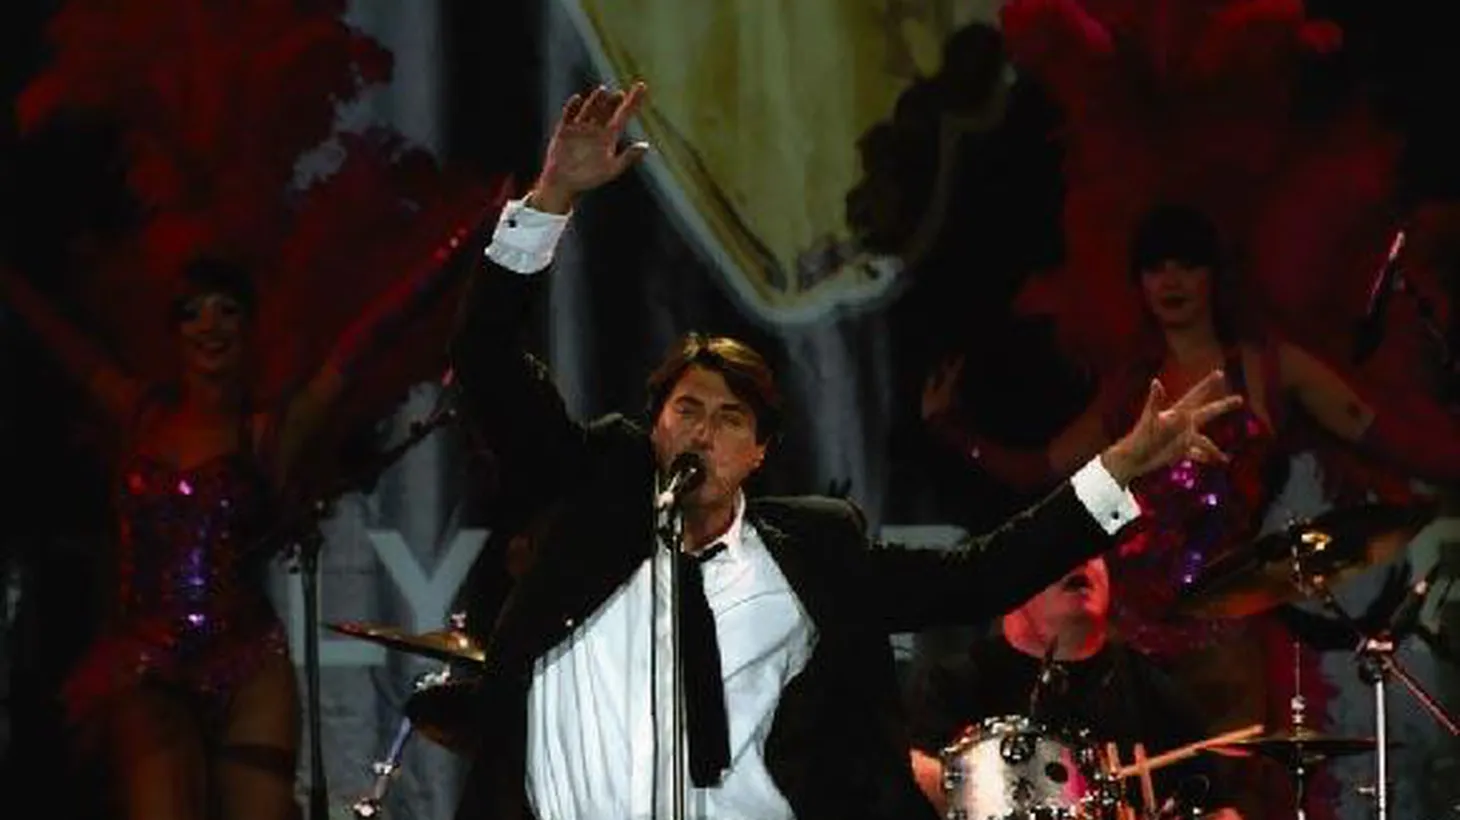 Bryan Ferry topped the charts with Roxy Music and continues to release excellent work as a solo artist...